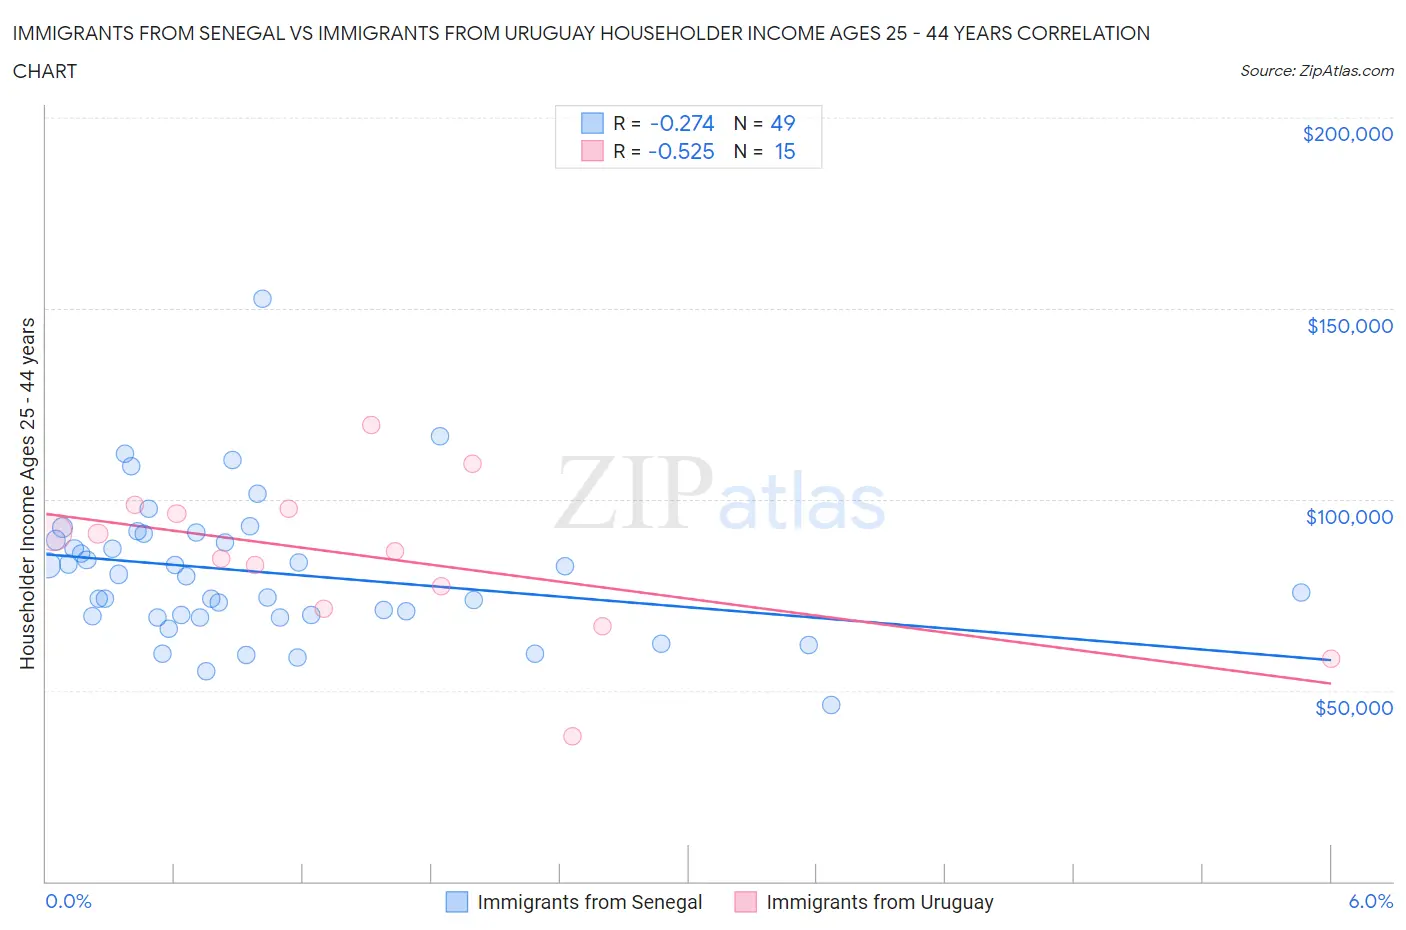 Immigrants from Senegal vs Immigrants from Uruguay Householder Income Ages 25 - 44 years